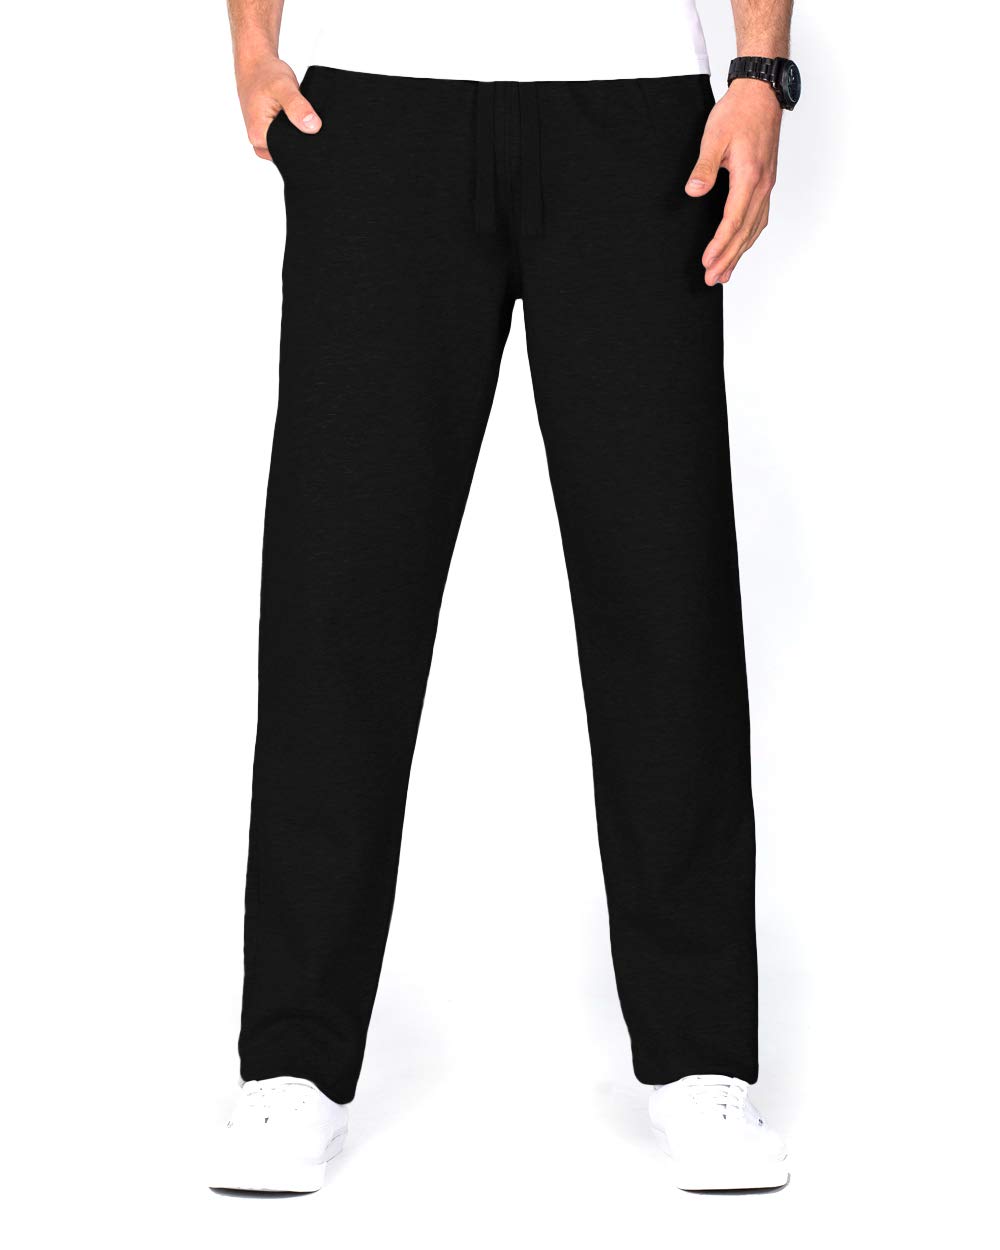 Idtswch 30/32/34/36/38/40 Long Inseam Mens Tall Sweatpants Open Bottom  Joggers Athletic Yoga Pants with Pockets